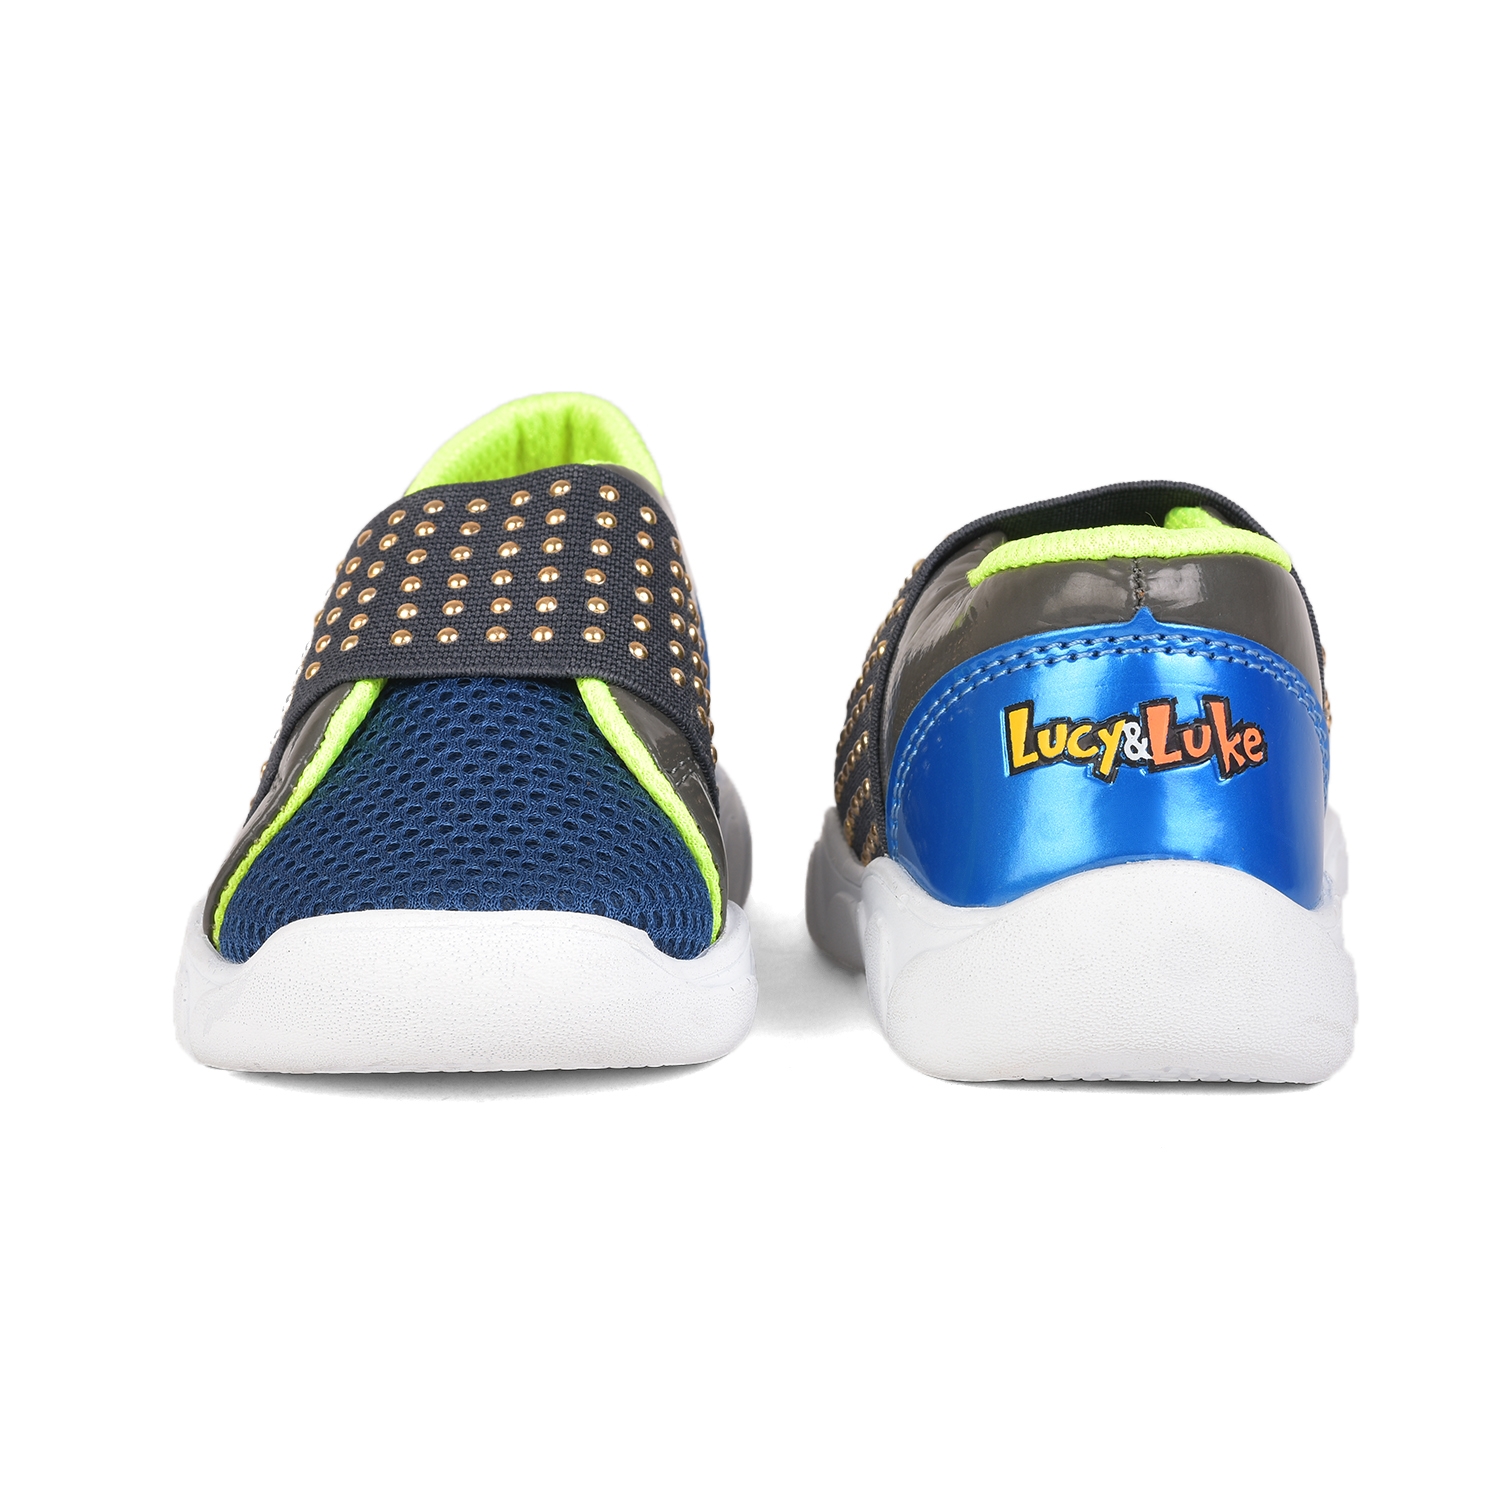 Lucy & Luke by Liberty FLYNN-25 R.Blue Casual Shoes for Kids